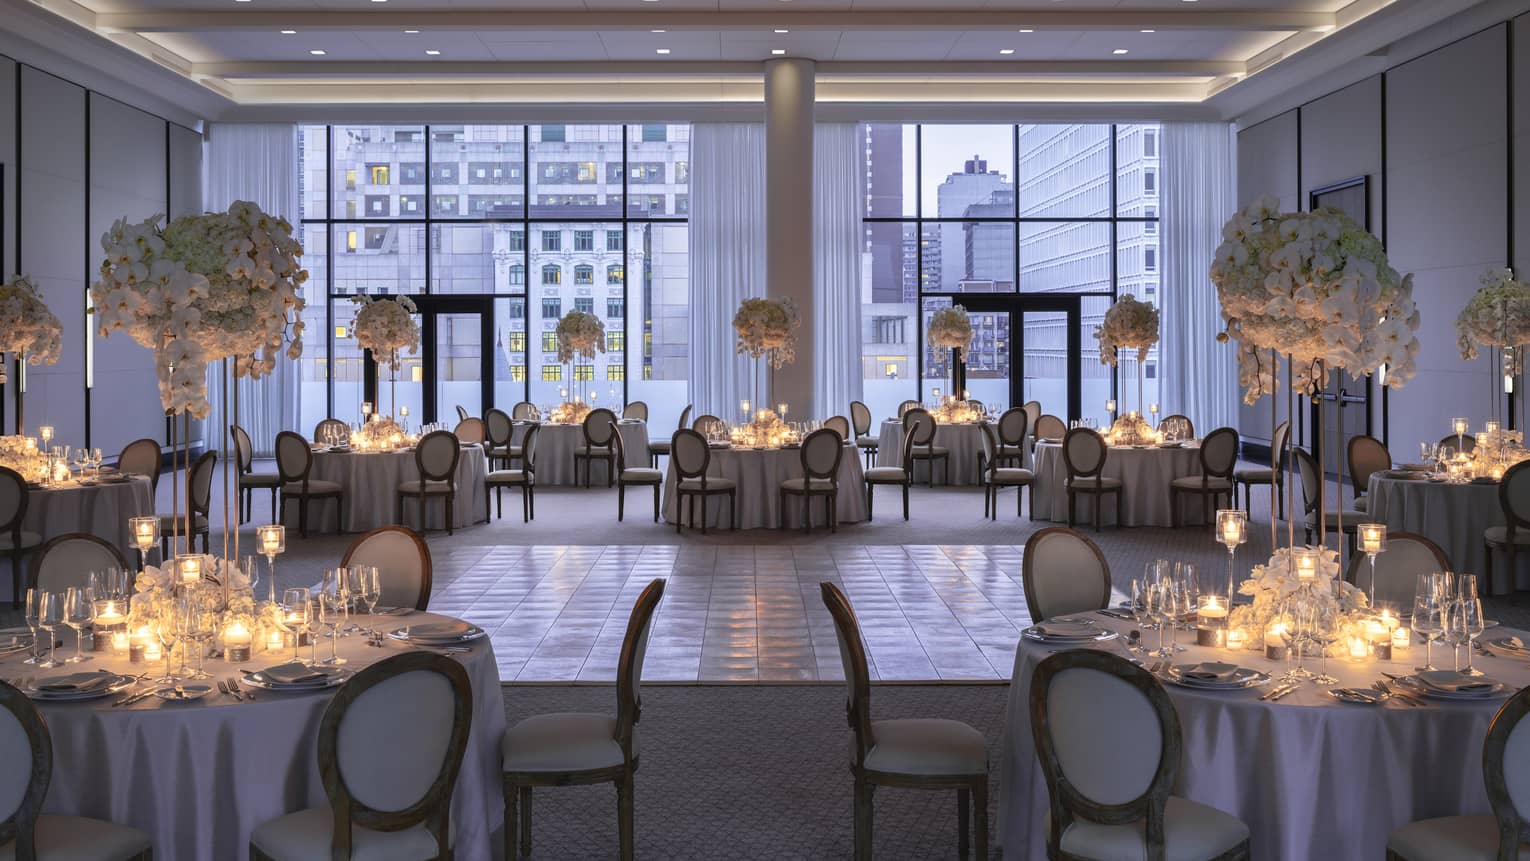 Palais des Possibles Ballroom with floor-to-ceiling windows, round tables with candles and large floral displays